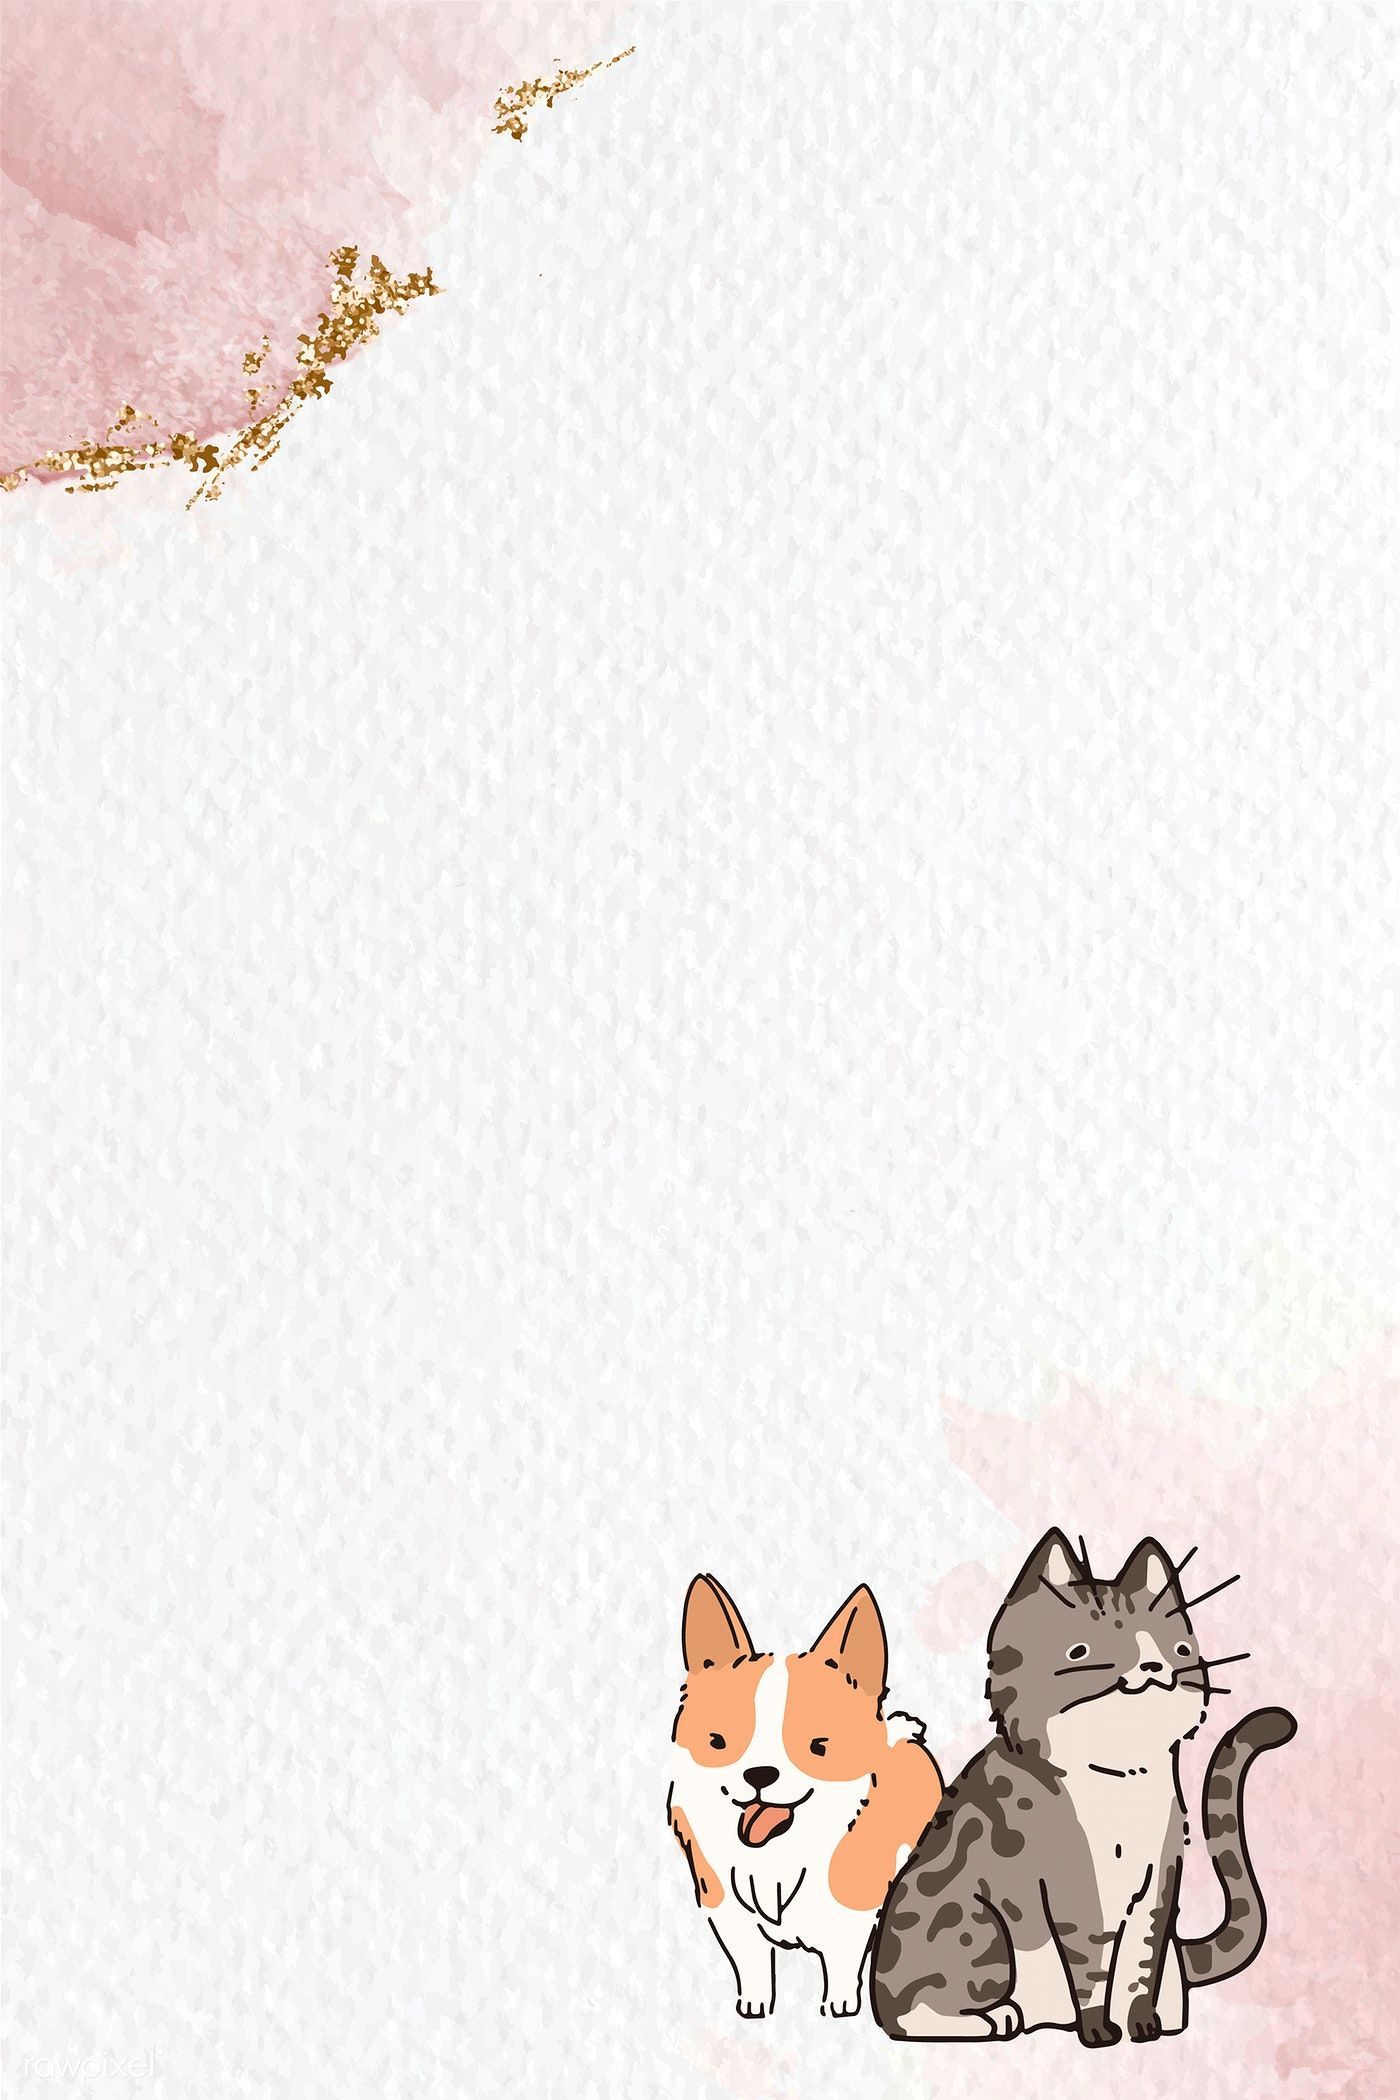 Cute Cartoon Dogs And Cats Wallpapers - Wallpaper Cave